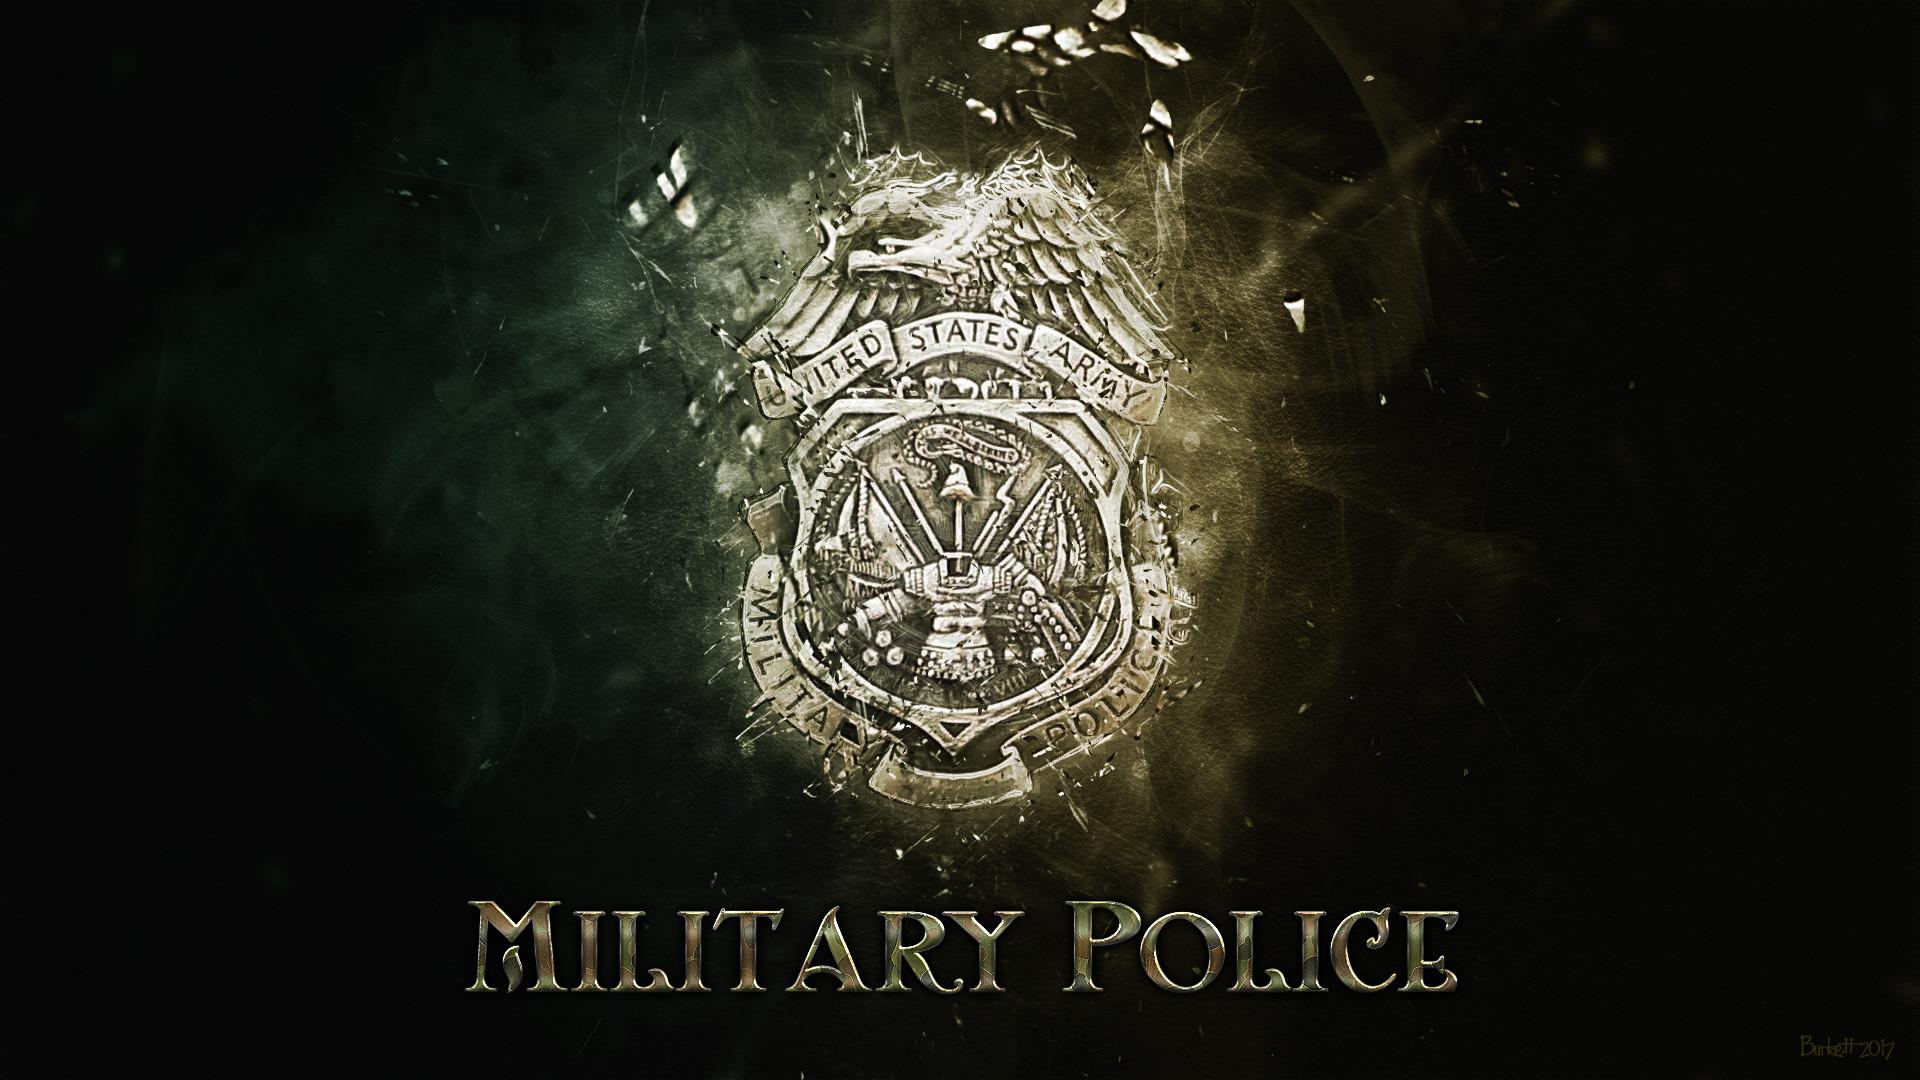 Collection of Army Logo Wallpaper (image in Collection)